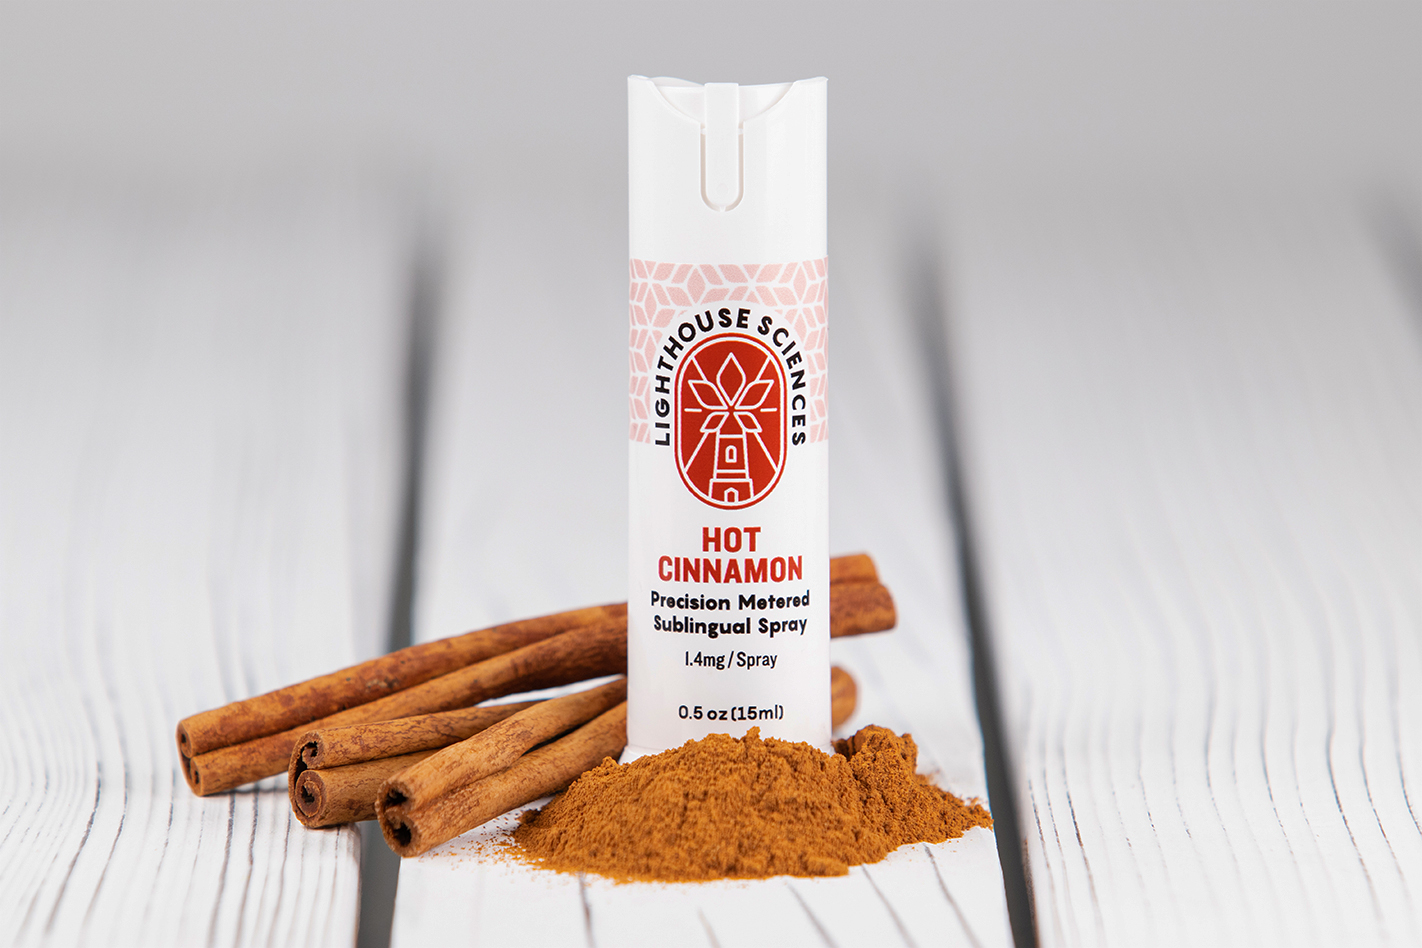 Lighthouse Sciences Hot Cinnamon- Precision Metered Sublingual Spray Bottle surrounded by cinnamon spice and cinnamon stocks on a wood background